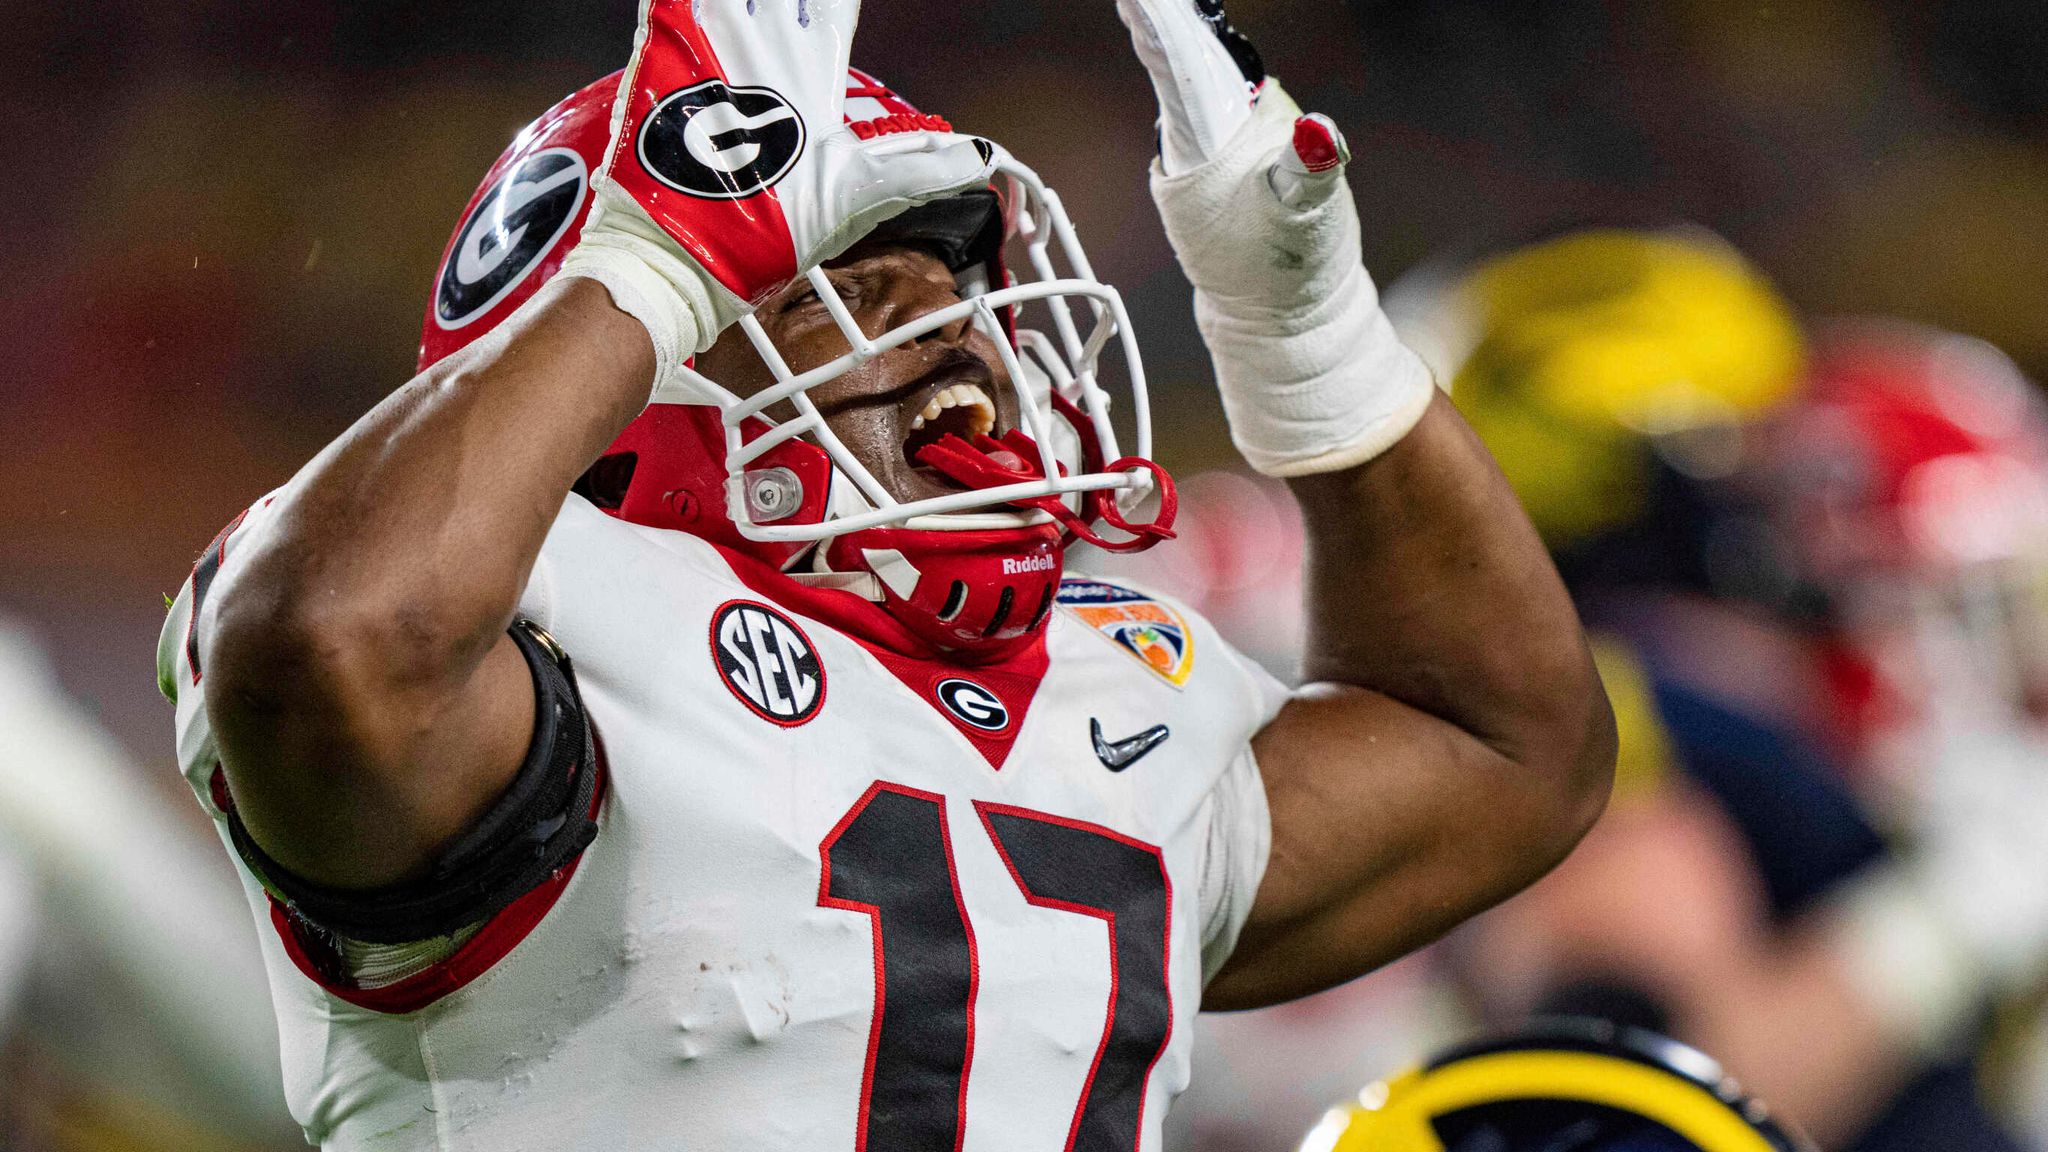 UGA football releases trailer for 2022 SEC Championship Game